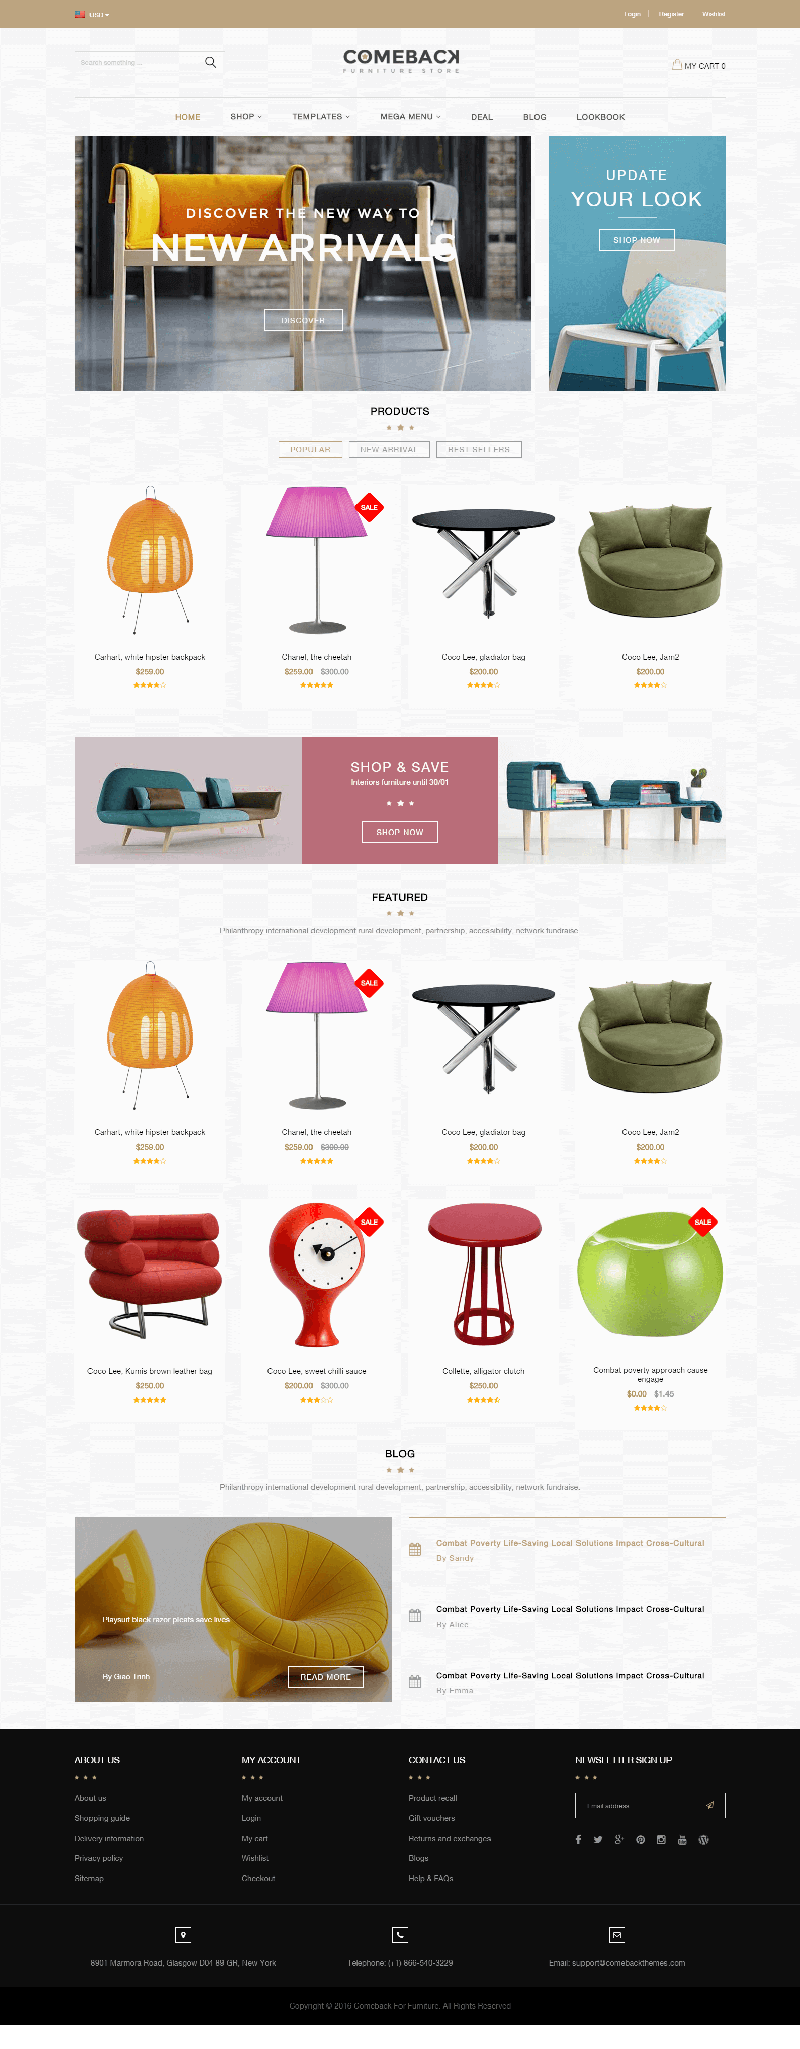 5 Best SHOPIFY Premium Themes Collection for HOMEWARE Accessories Store 2017 - Comeback - Advanced Shopify Theme Option- Drag and Drop Page Builders